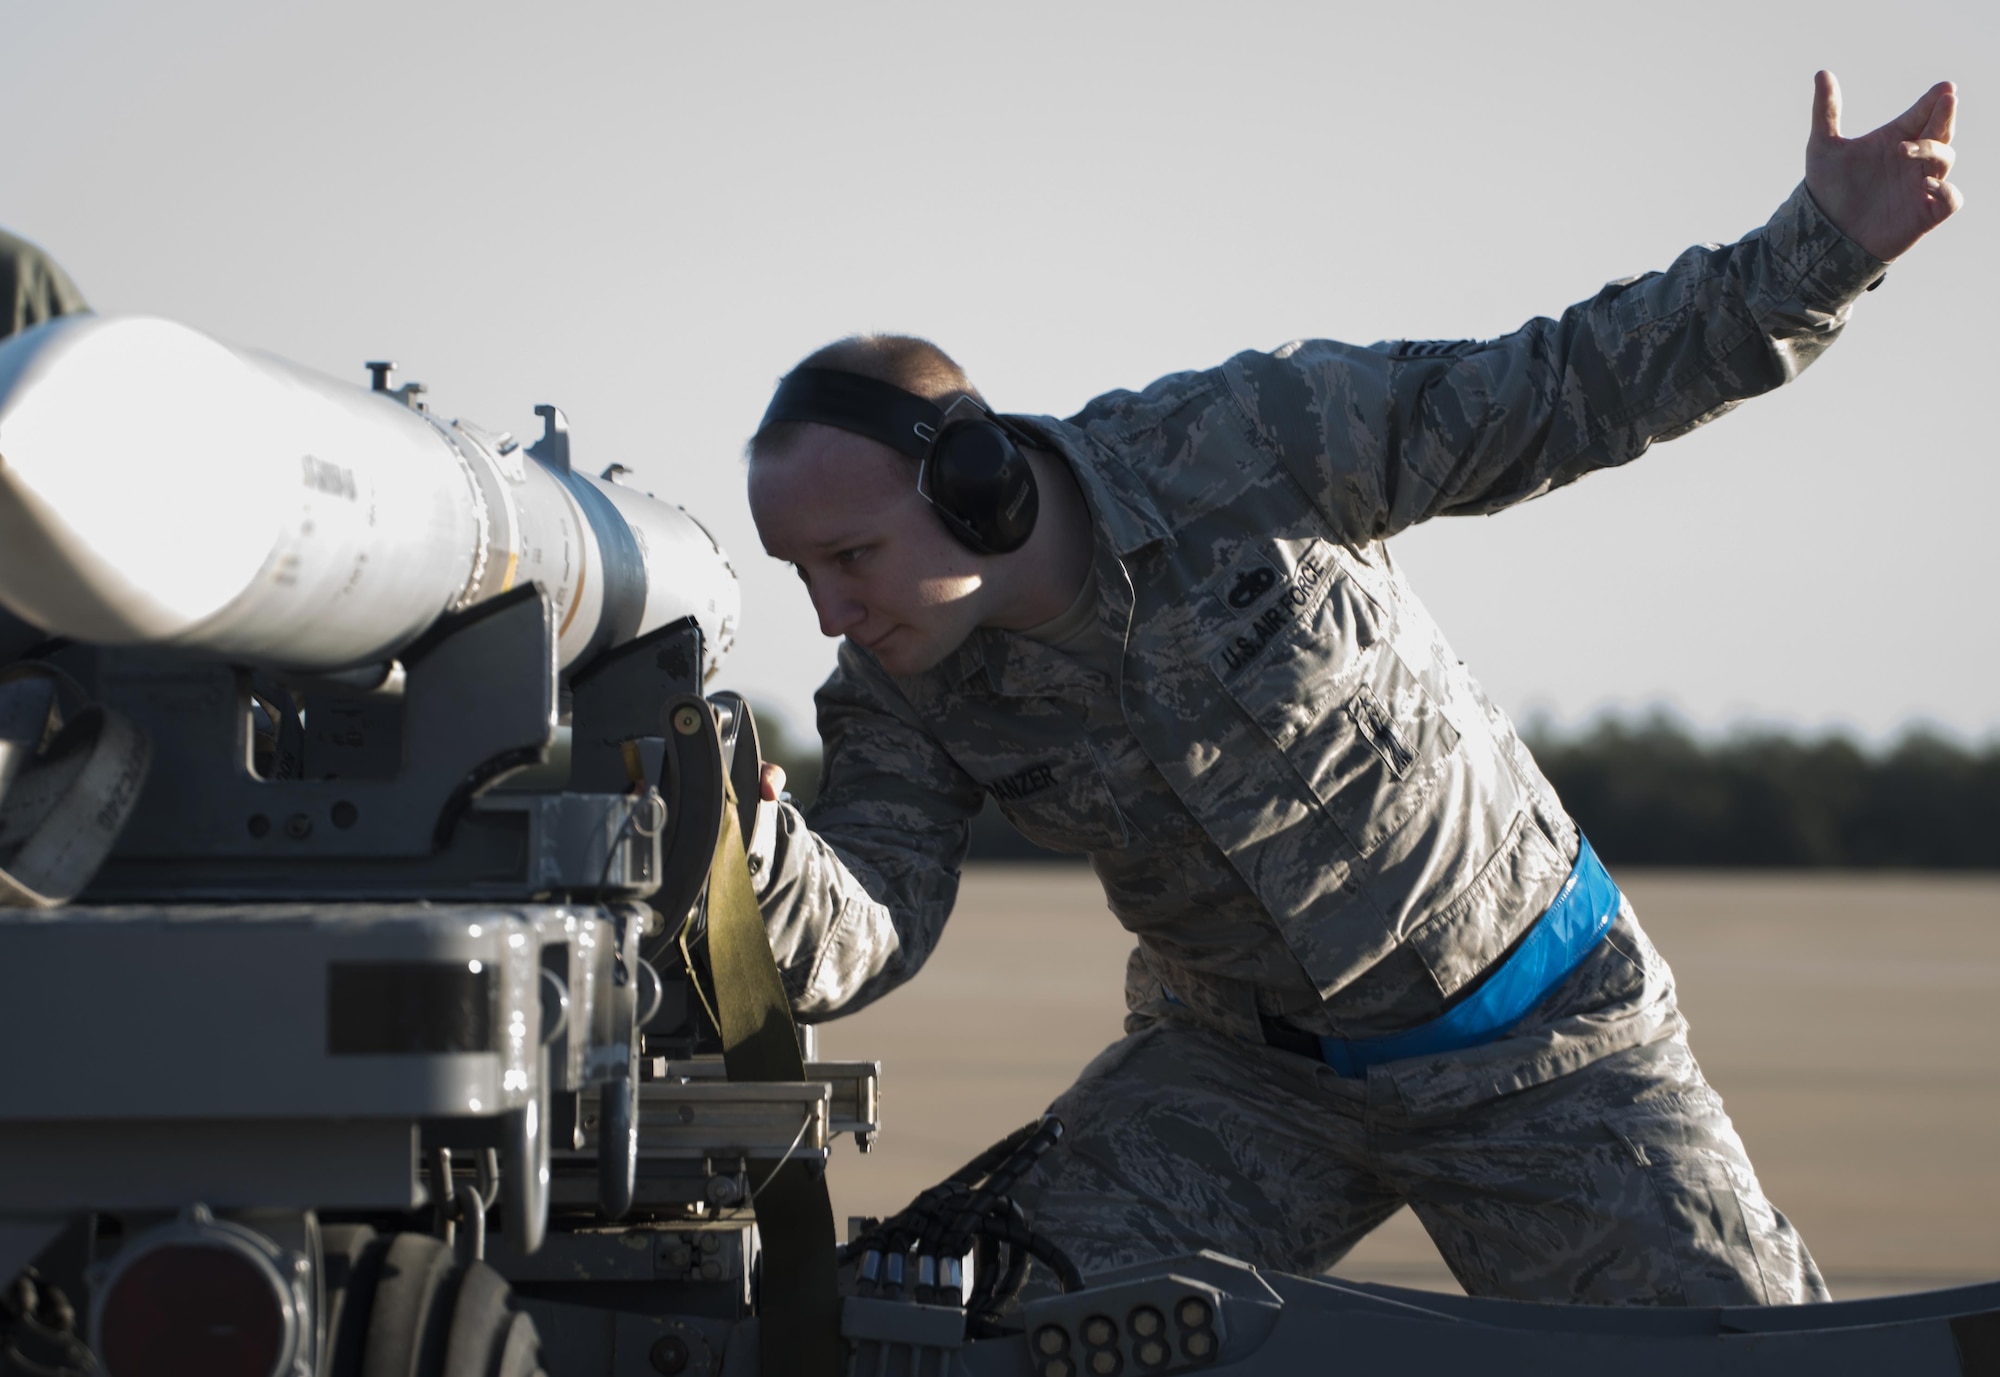 U.S. Air Force Staff Sgt. David Panzer, 33rd Aircraft Maintenance Squadron weapons load crew chief, secures a live AIM-120 advanced medium-range air-to-air missiles (AMRAAM)  onto a weapons jammer before loading it into an F-35A January 31, 2017, at Eglin Air Force Base, Florida. The 33rd Fighter Wing loaded and shot the first air-to-air missiles from an F-35A during a weapons system evaluation that took place at Tyndall Air Force Base later the same day. Carrying air-to-air missiles makes the F-35 a more versatile option for combatant commanders by securing the aircrafts survivability, in turn increasing likeliness of mission success.  (U.S. Air Force photo by Staff Sgt. Peter Thompson)